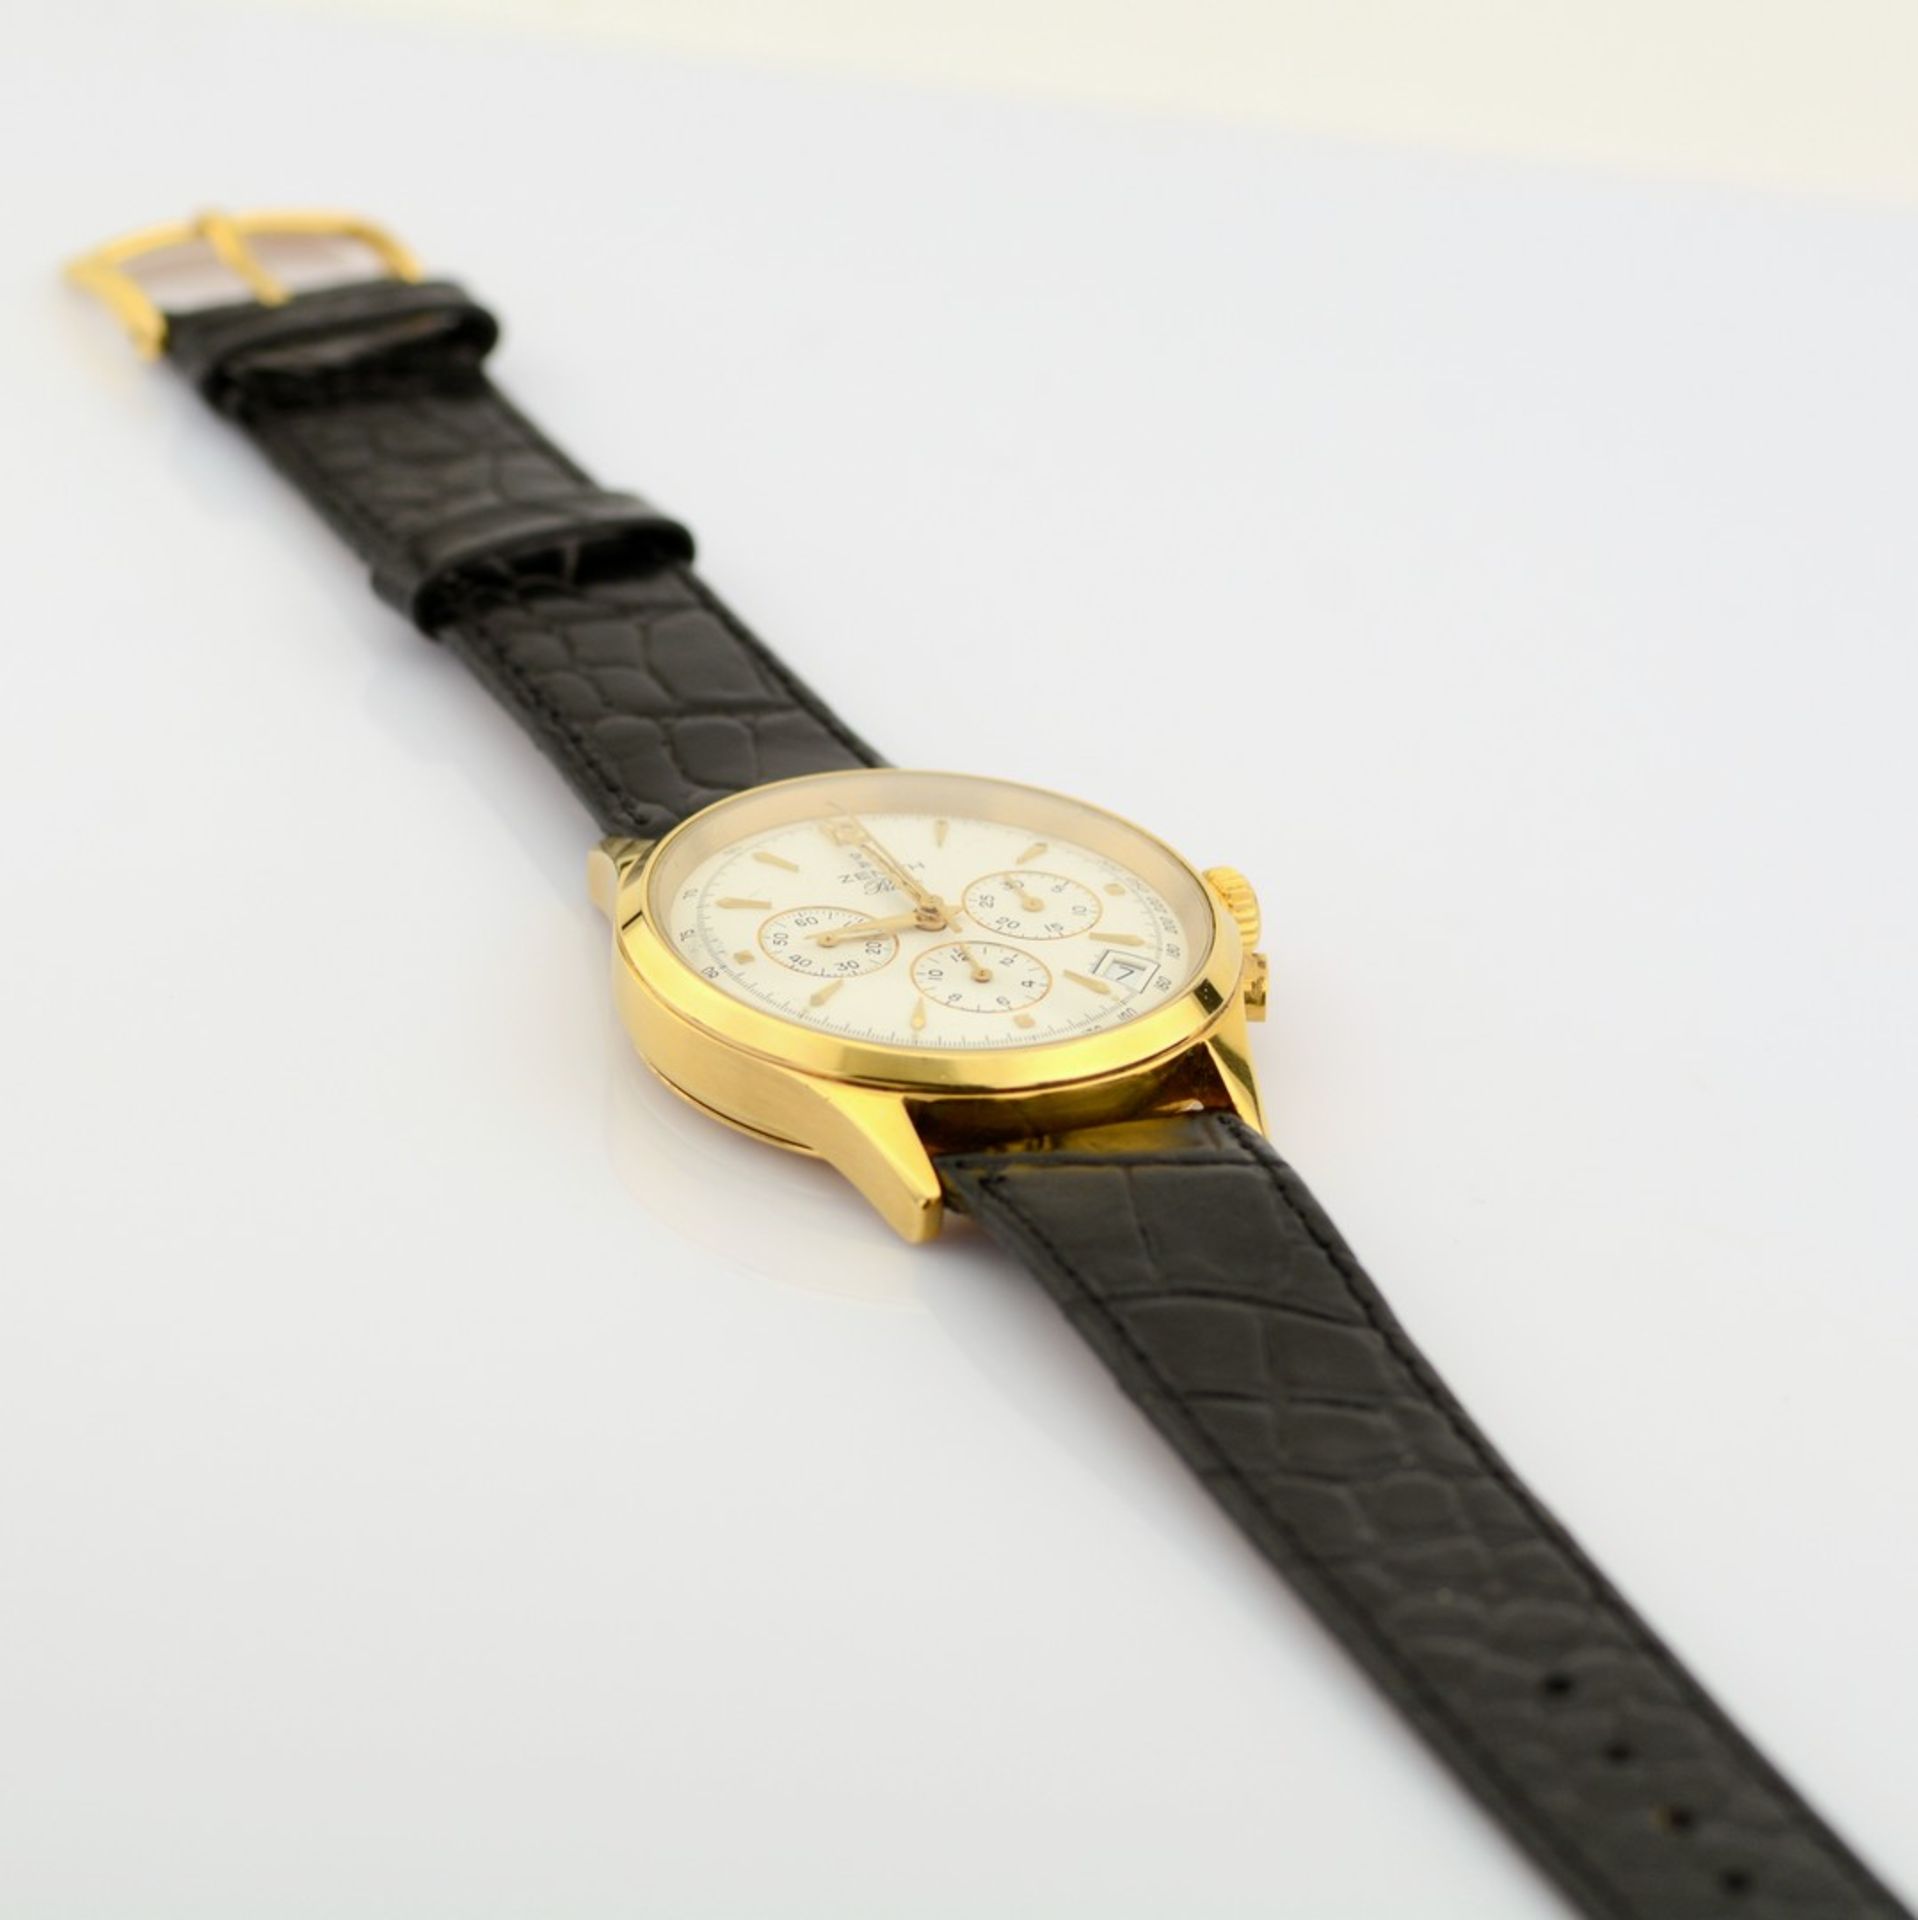 Zenith / Prime Chronograph - Gentlemen's Gold-plated Wristwatch - Image 8 of 8